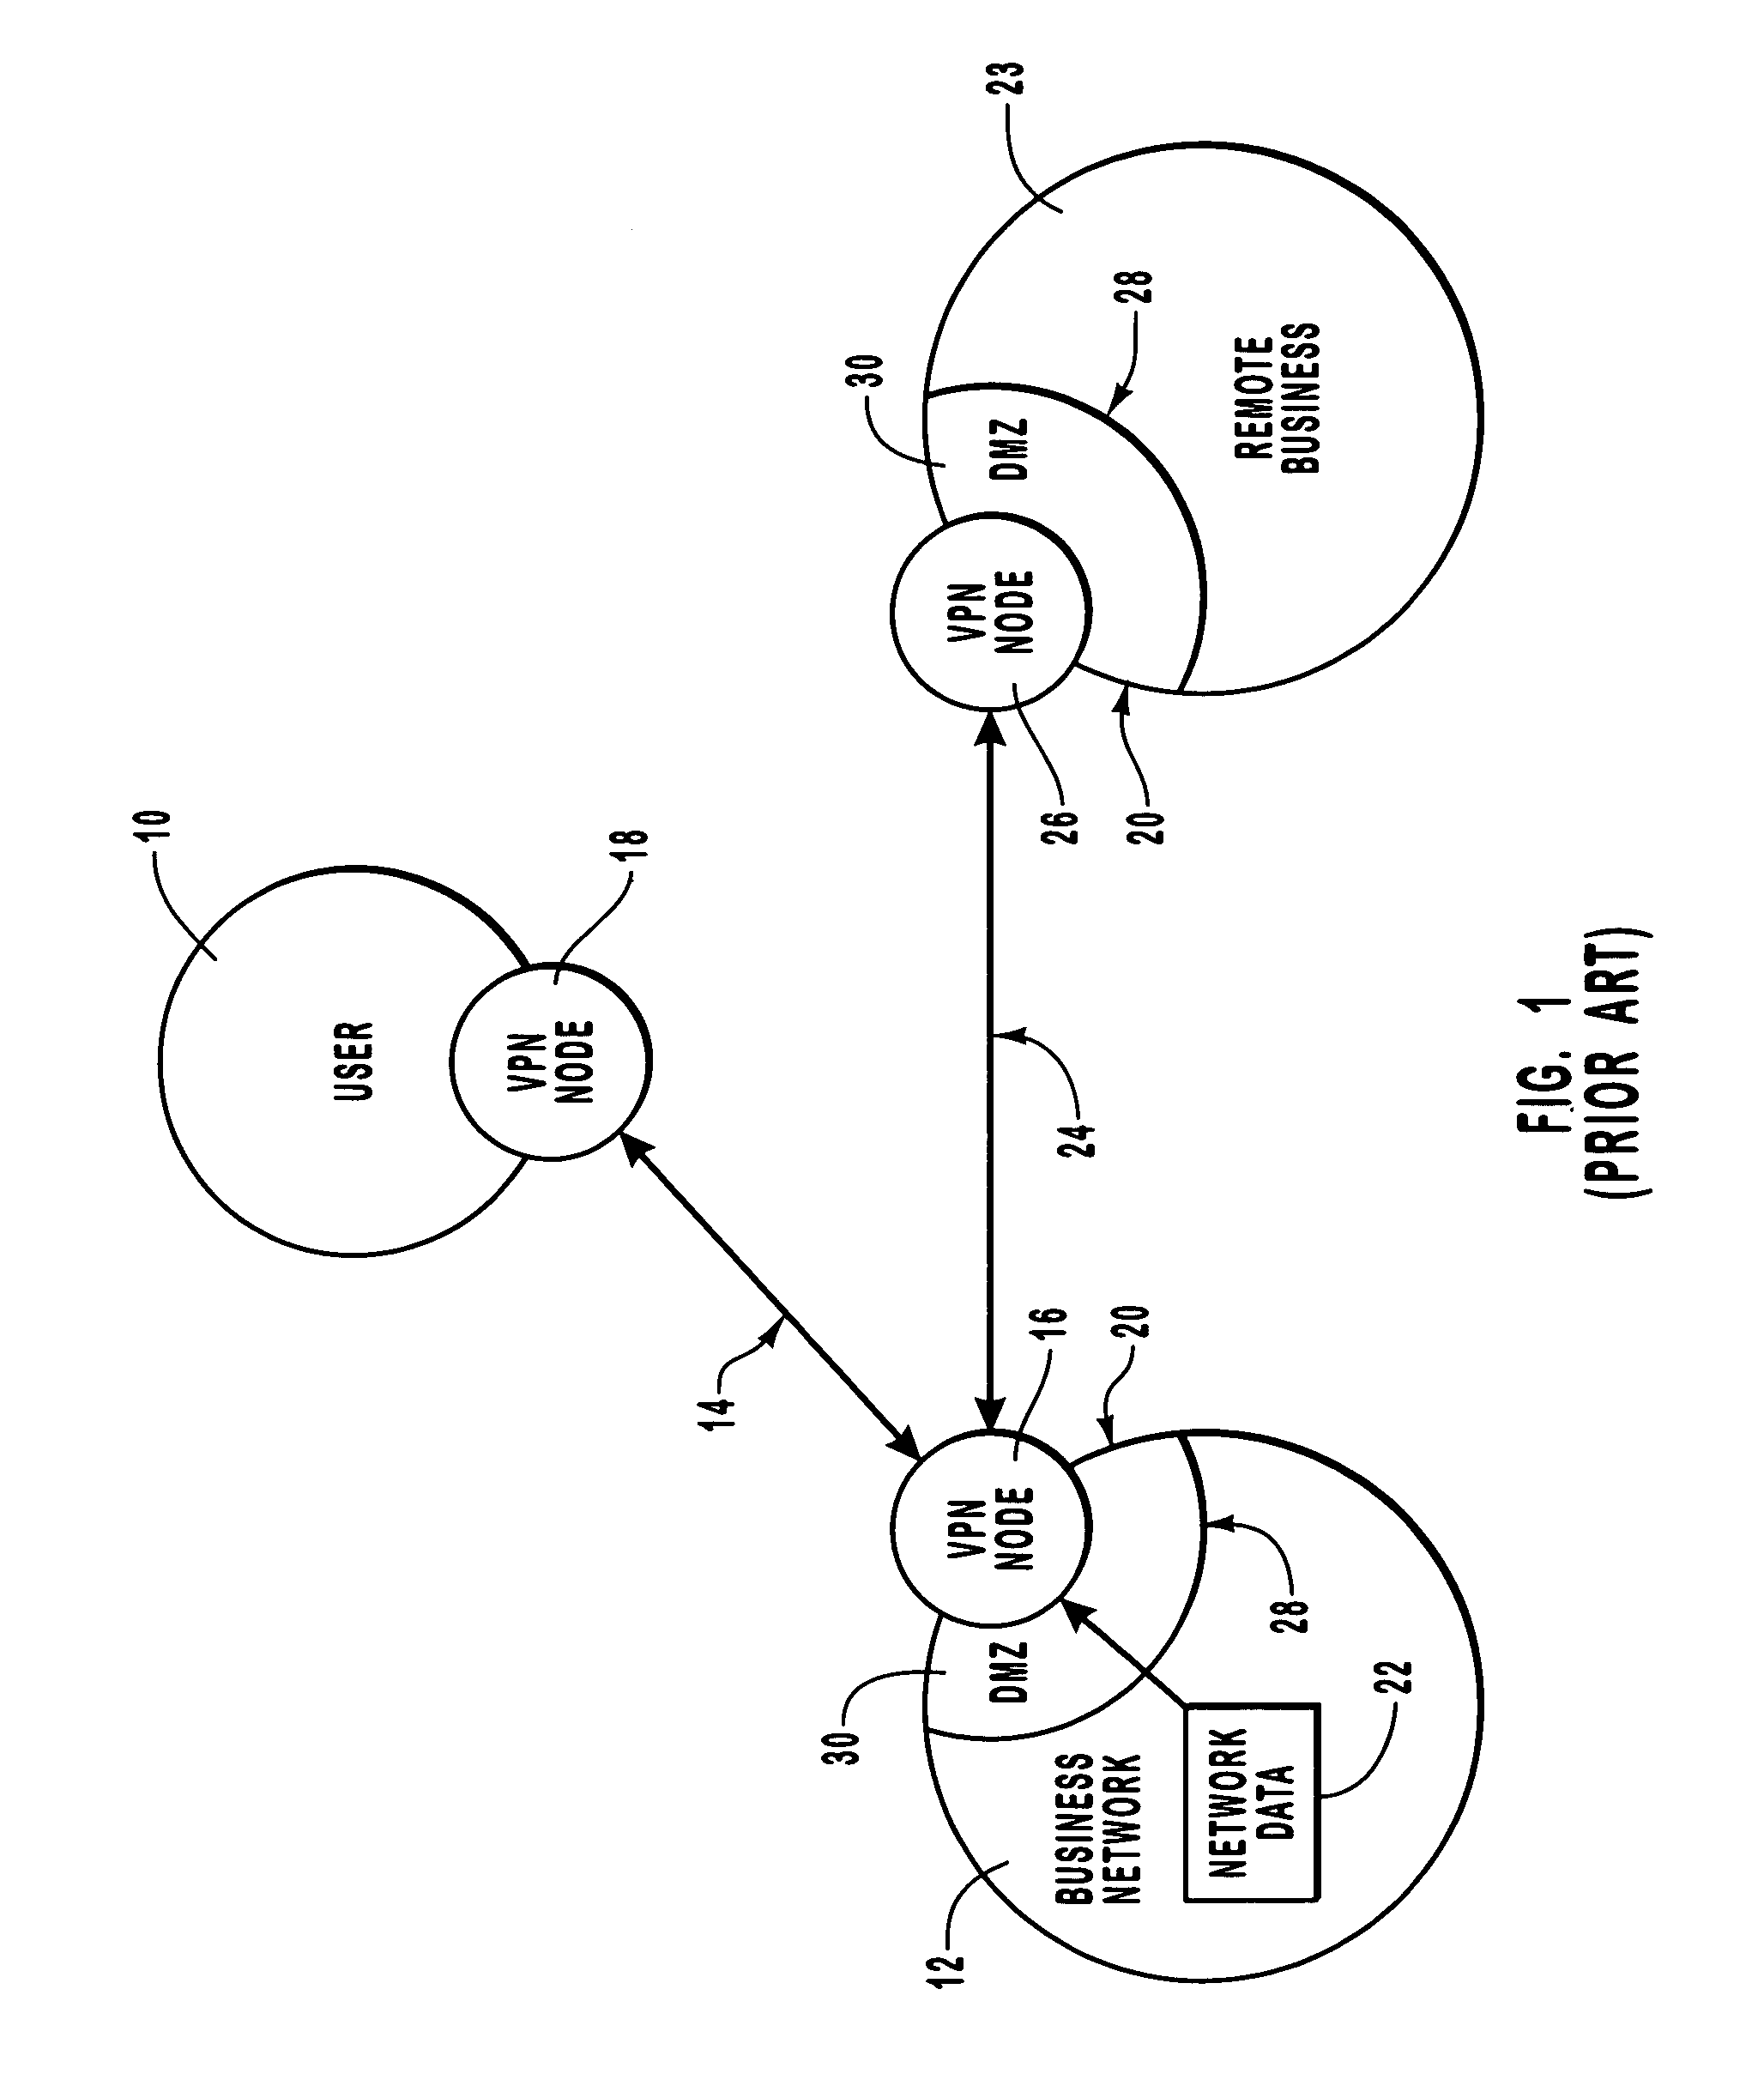 Spontaneous virtual private network between portable device and enterprise network